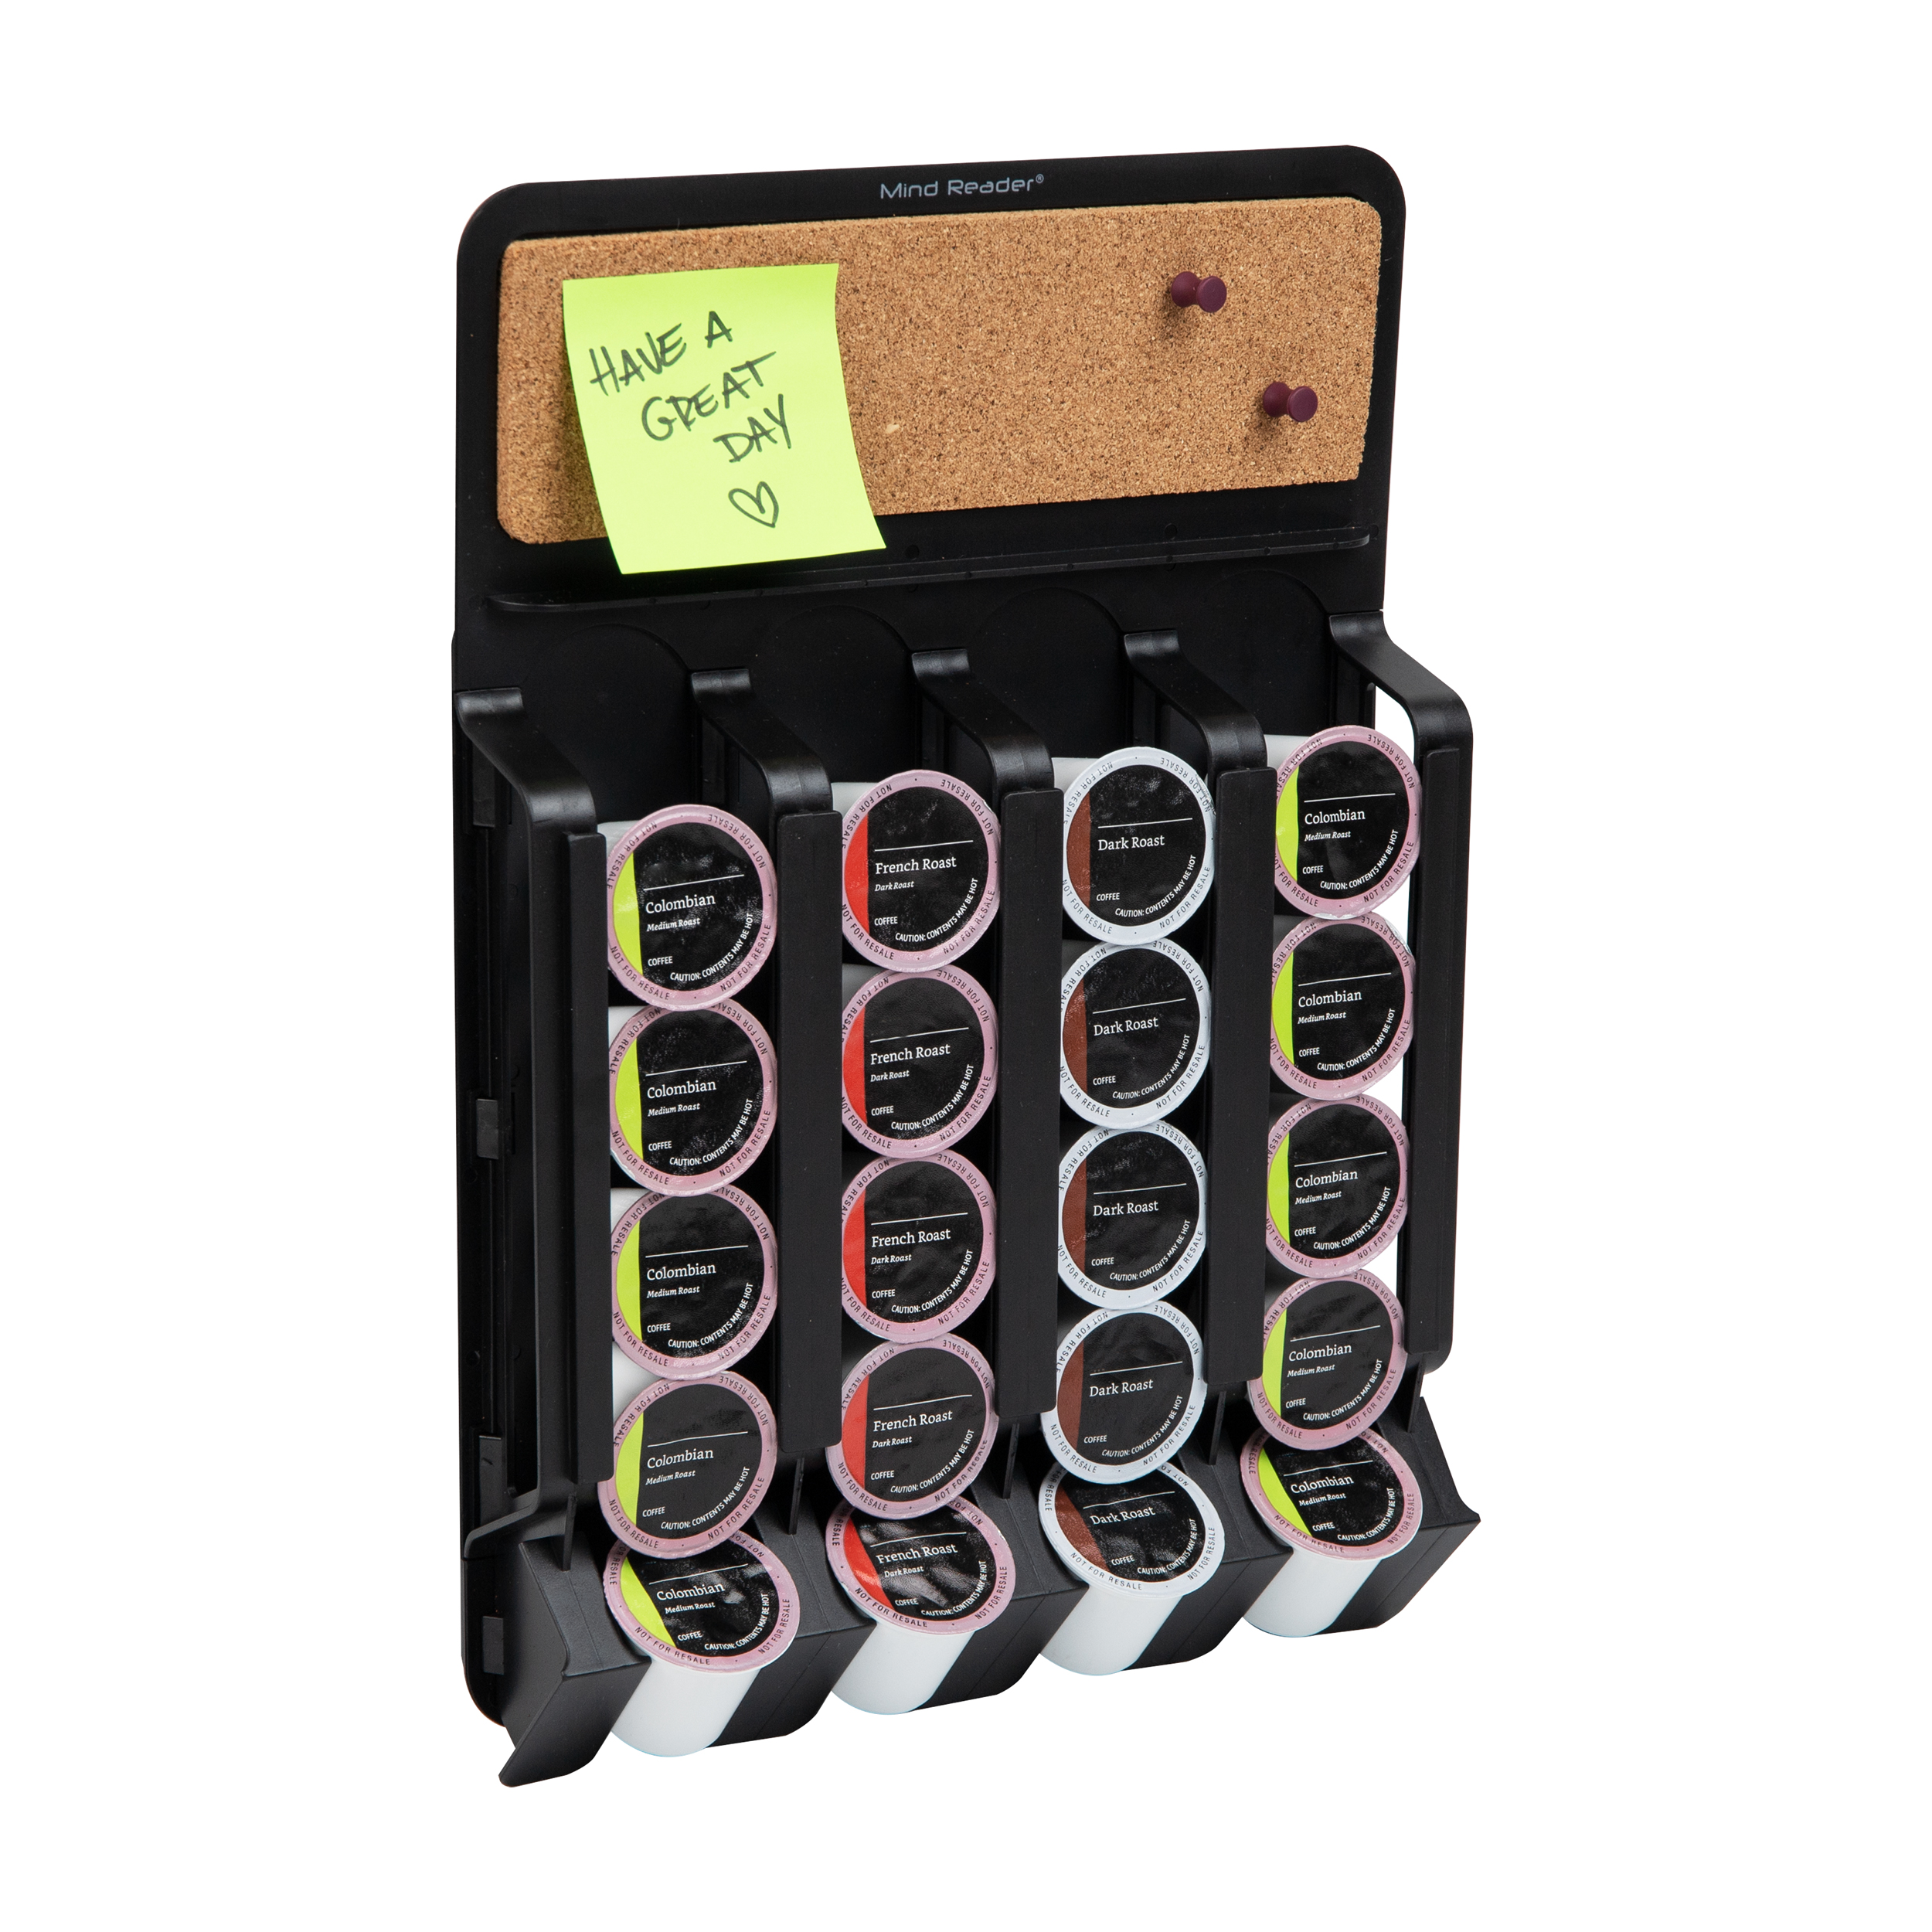 Angle View: Mind Reader - Single Serve Pod Organizer, Wall Mount, 20 Pod Capacity, Magnetic or Adhesive, 10.75"L x 15.5"W x 2.5"H - Black